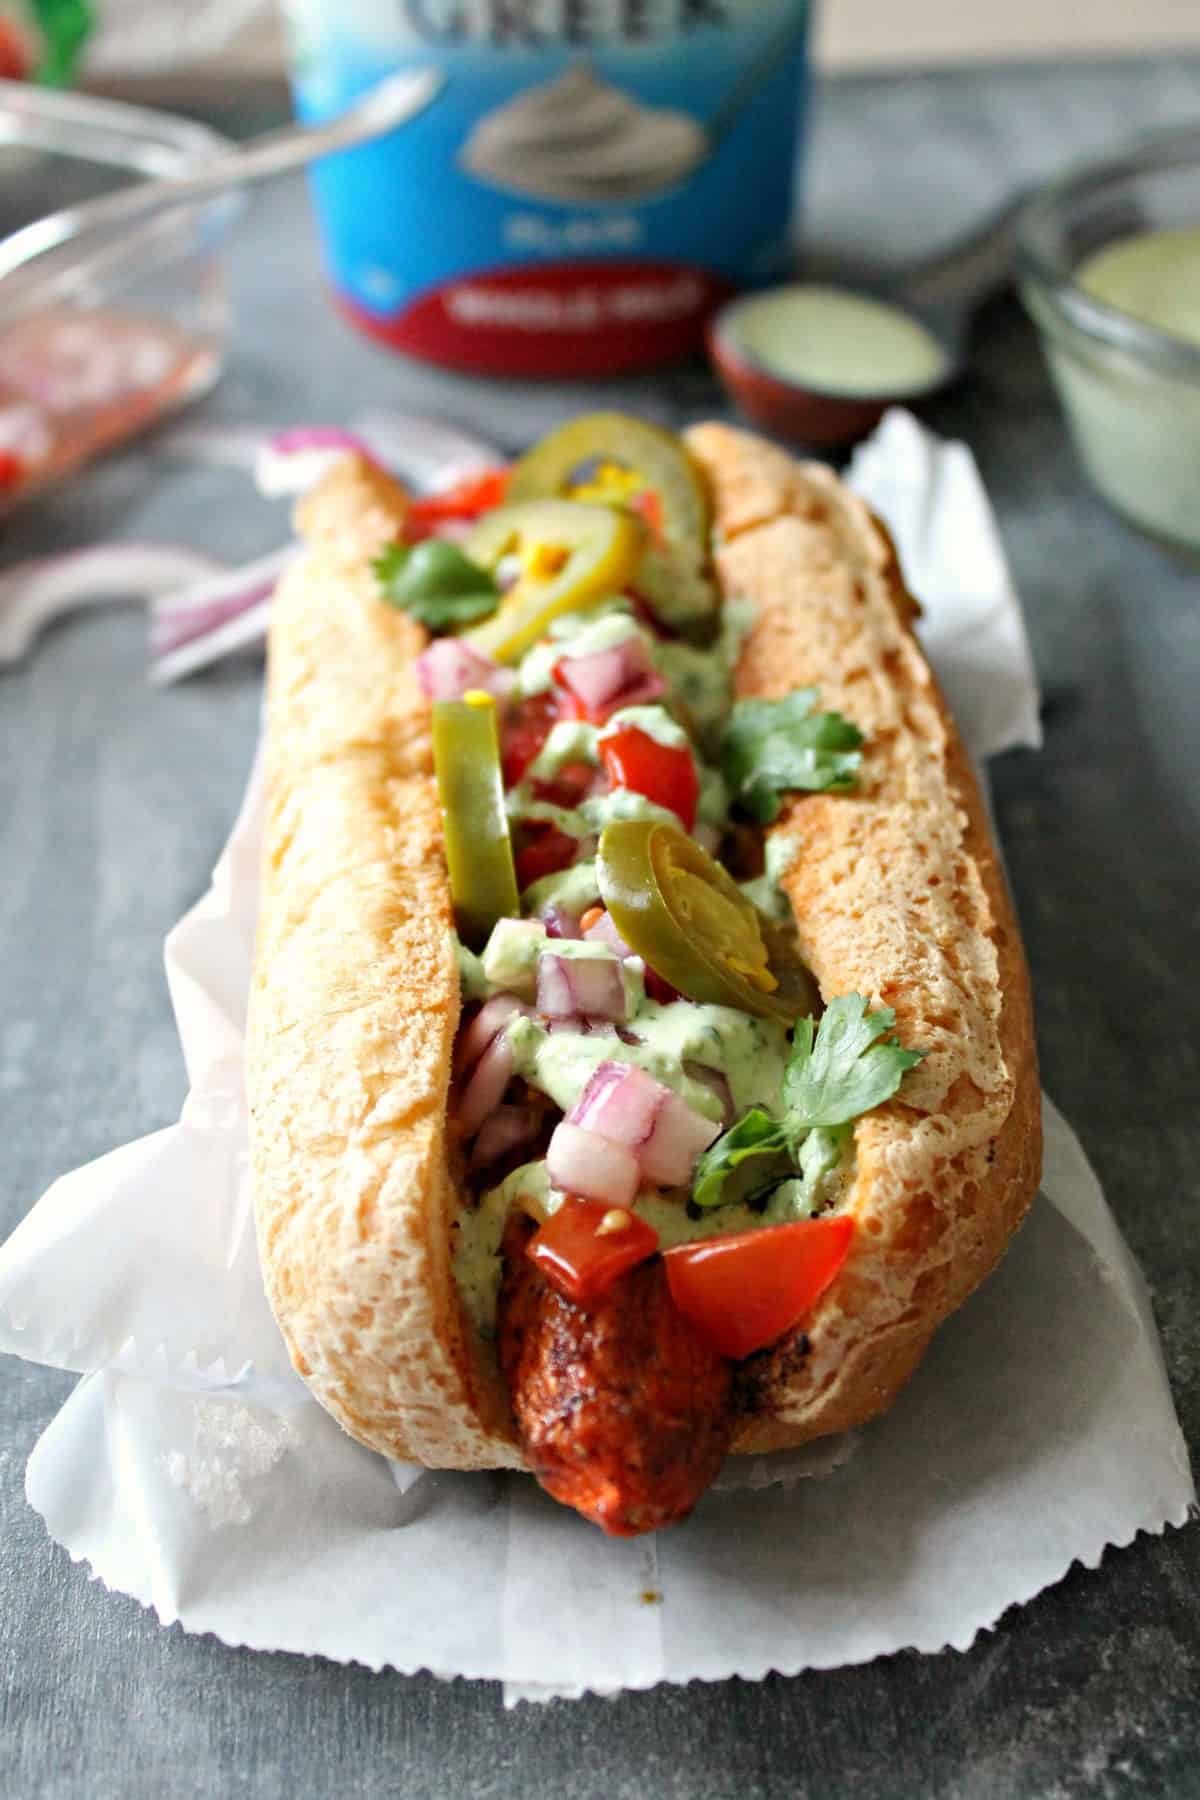 Tex-Mex "Carrot Dogs" with Cilantro Garlic Yogurt Sauce. A meatless version of a summer favorite: Smoky carrot "hot dogs" loaded with Tex-Mex toppings!